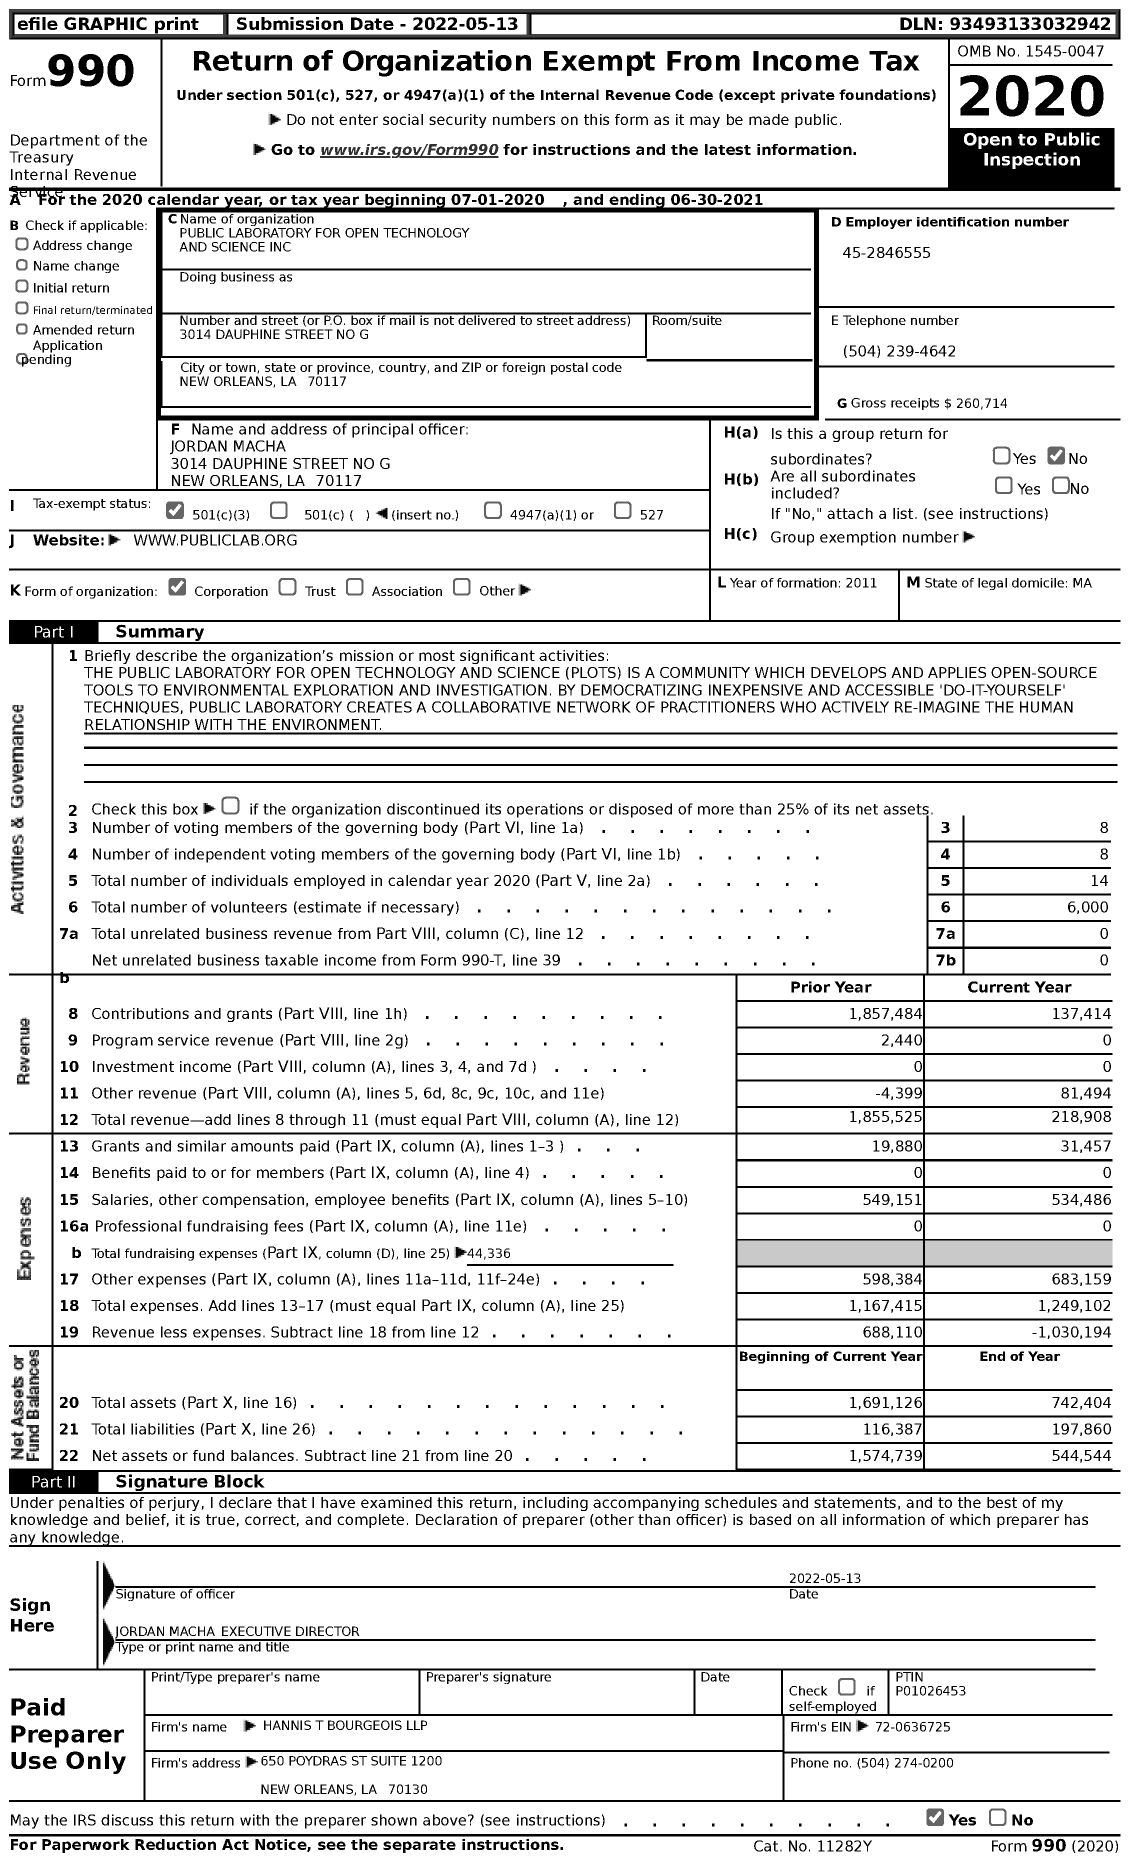 Image of first page of 2020 Form 990 for Public Laboratorties for Open Technology and Science